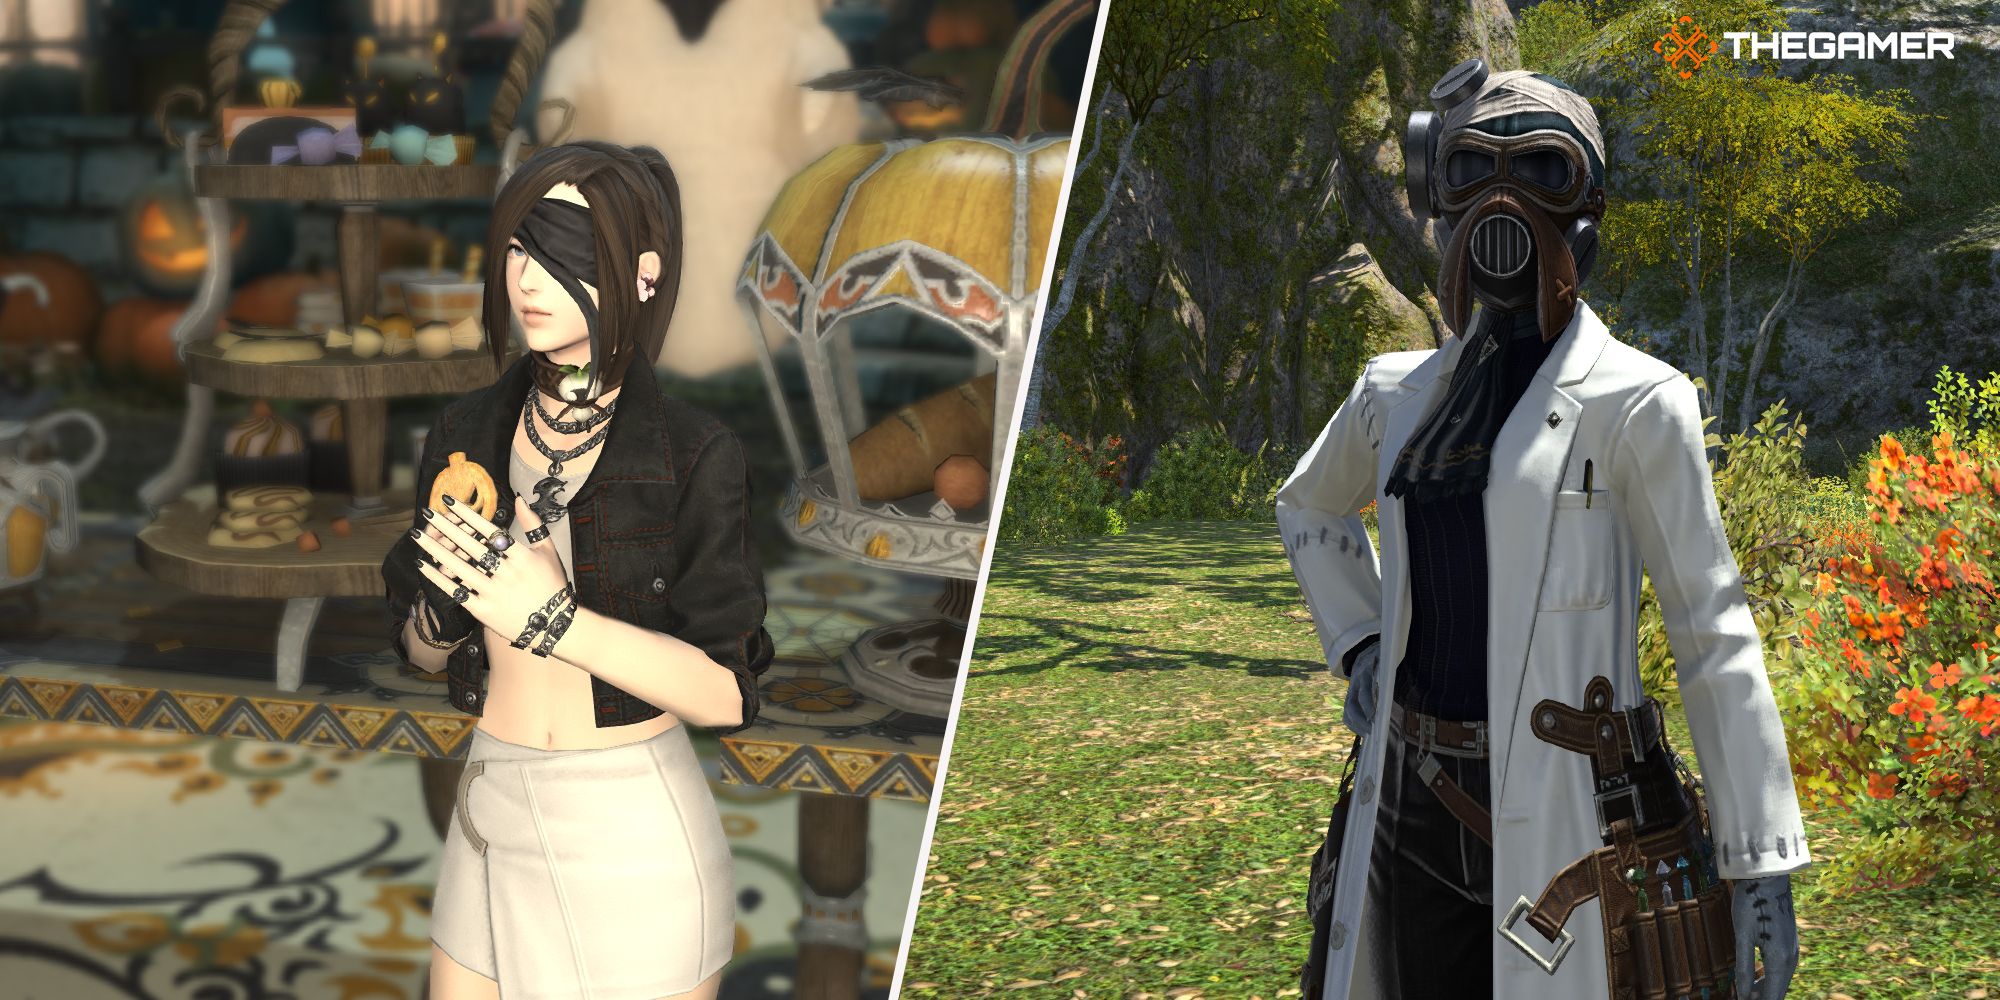 Final Fantasy 14 All Saints Wake collage - player eating a cookie and new wake doctor gear